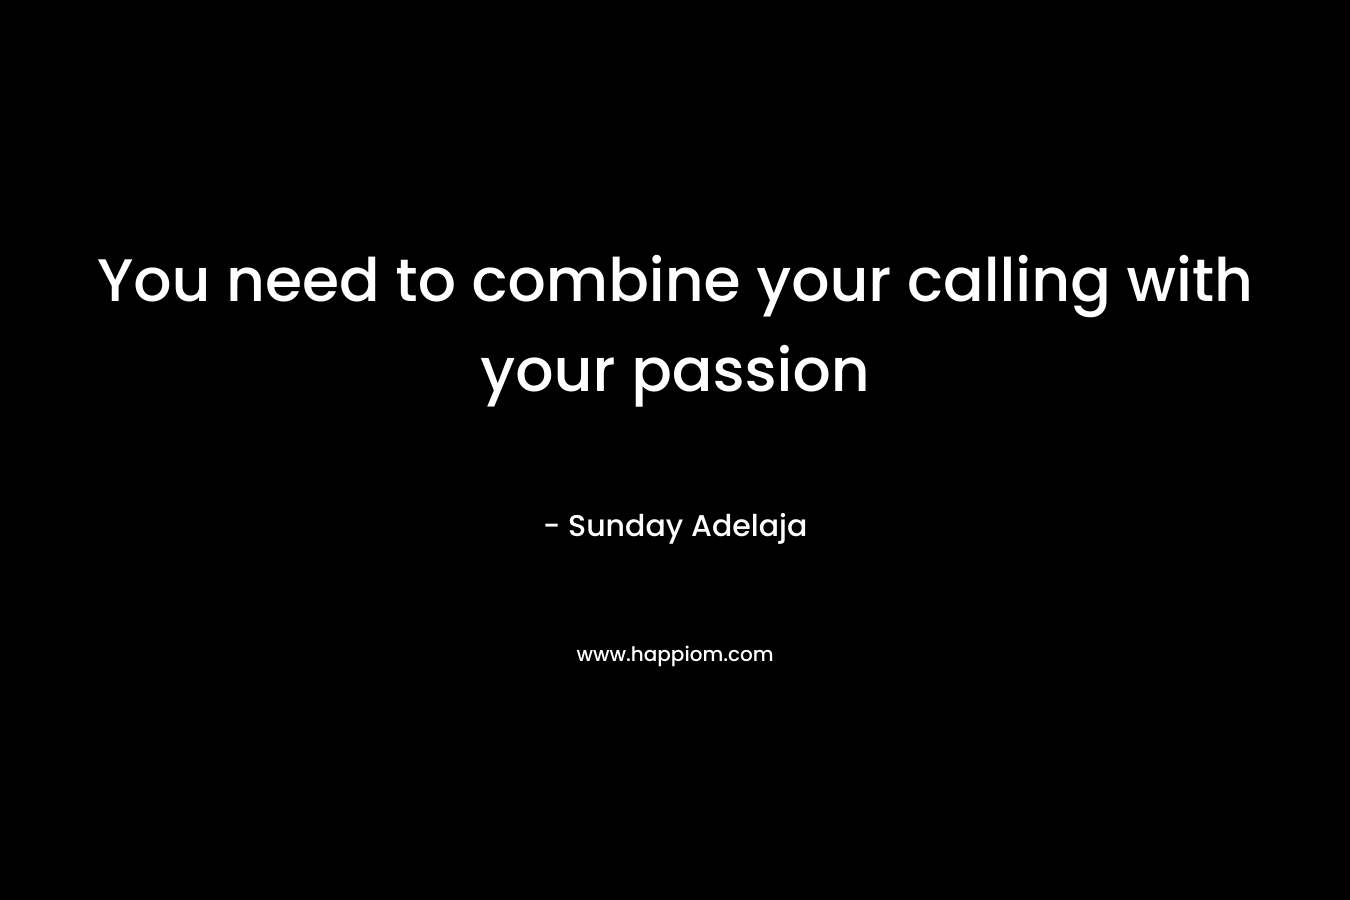 You need to combine your calling with your passion